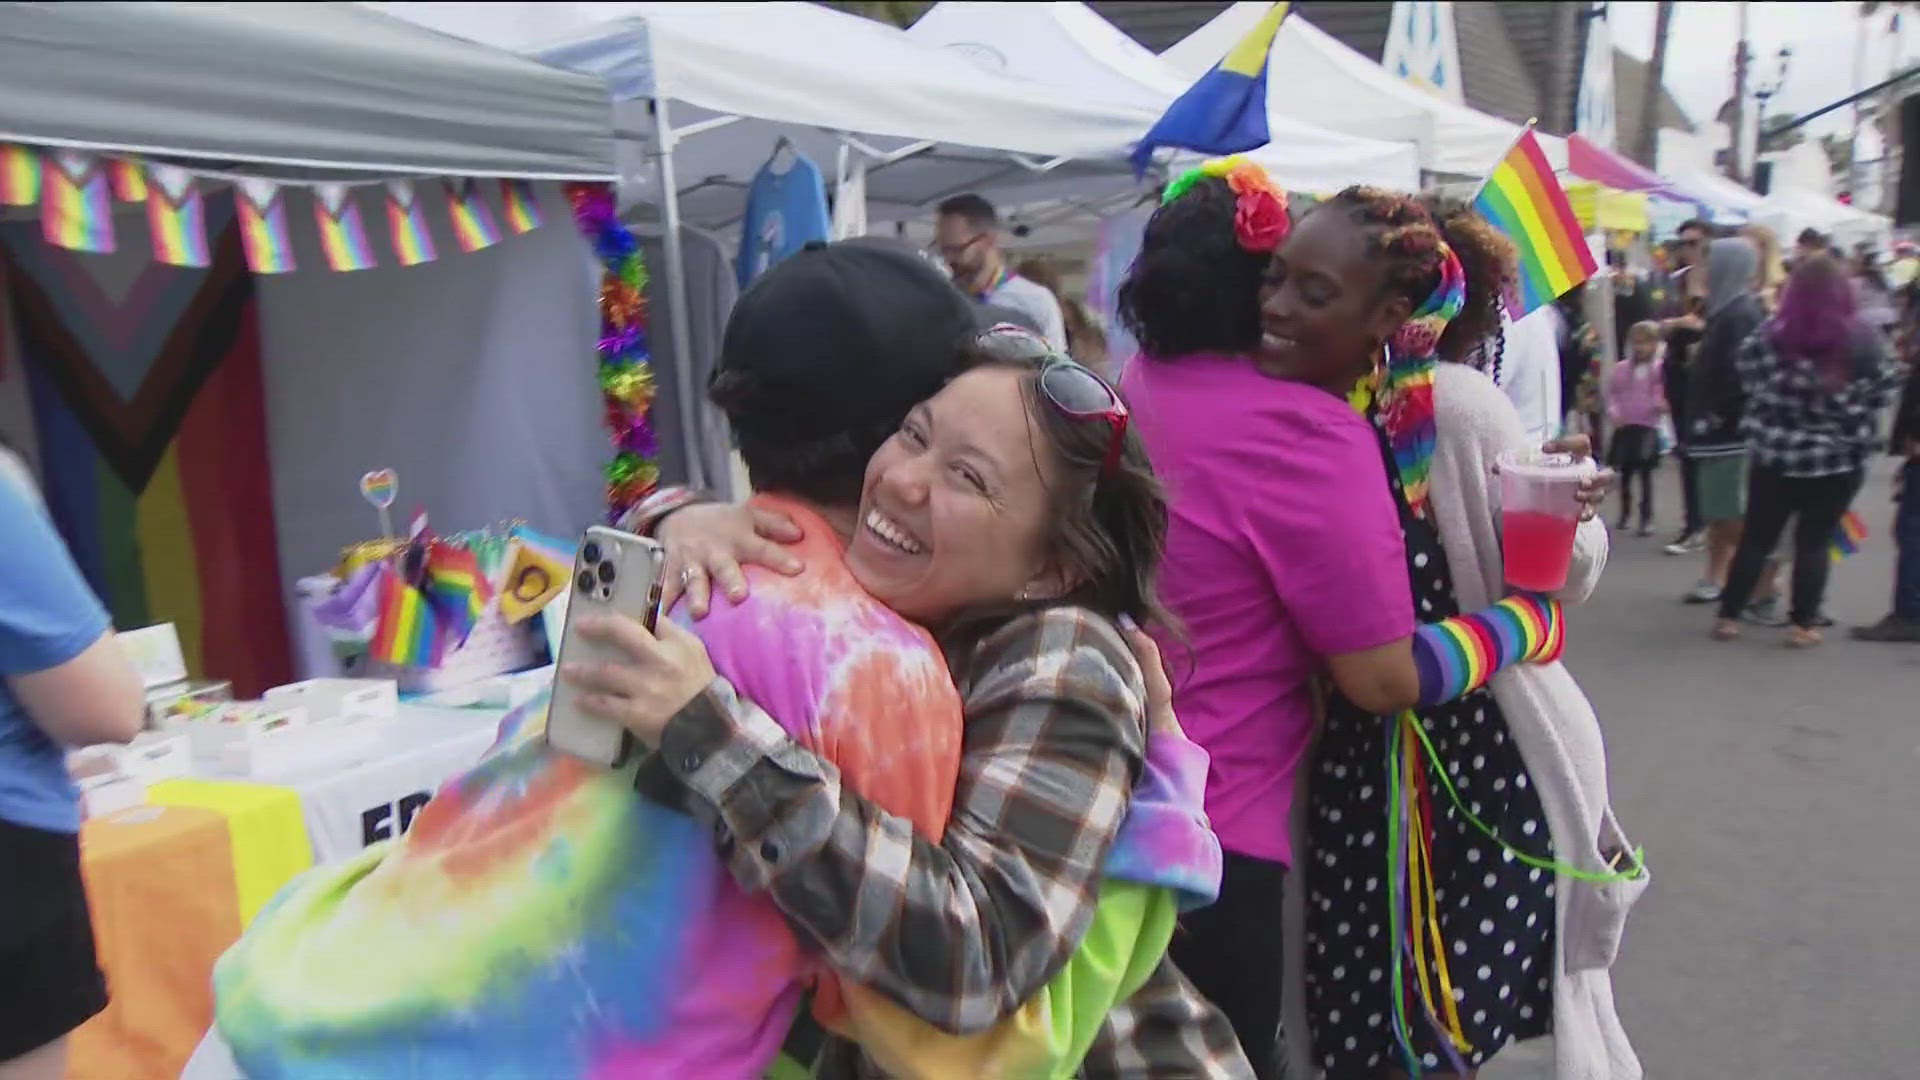 Every year, the North County LGBTQ+ Resource Center hosts its Pride by the Beach event. More than 20,000 people and 170 booths made this year's the biggest yet.